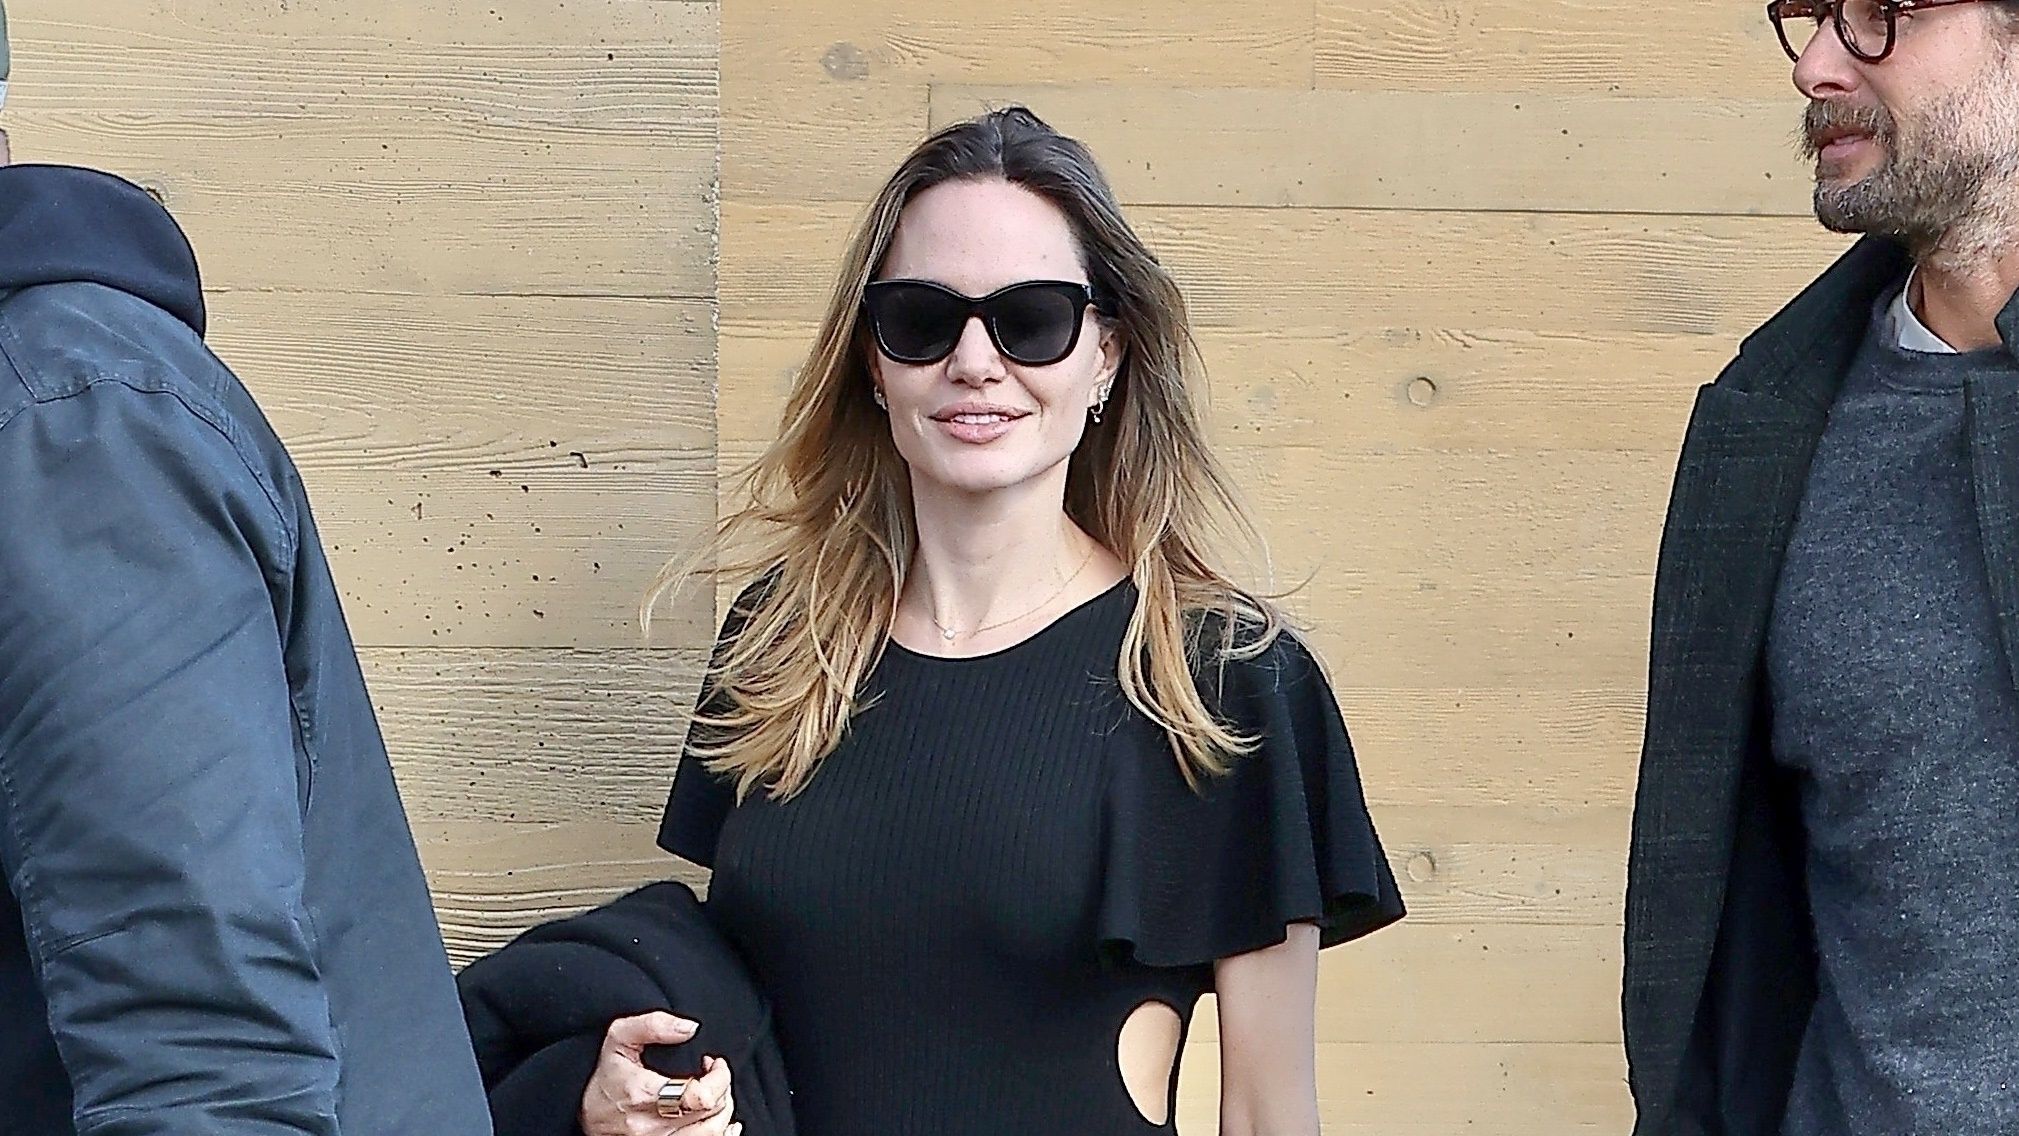 Angelina Jolie Steps Out In A High-Slit Black Dress For Dinner In